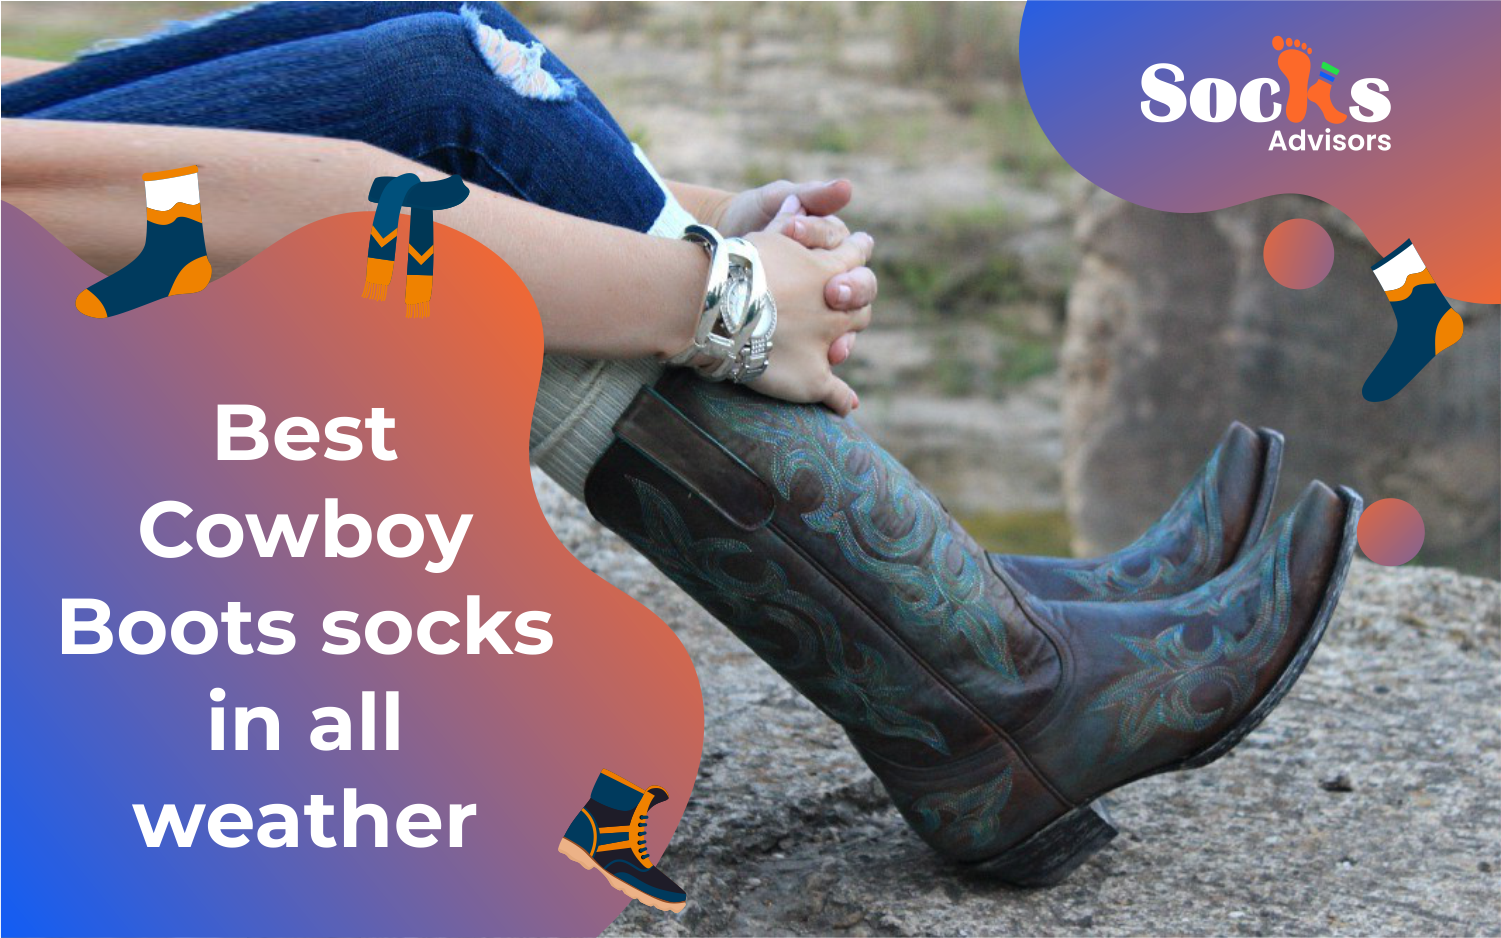 Best Cowboy Boots socks in all weather